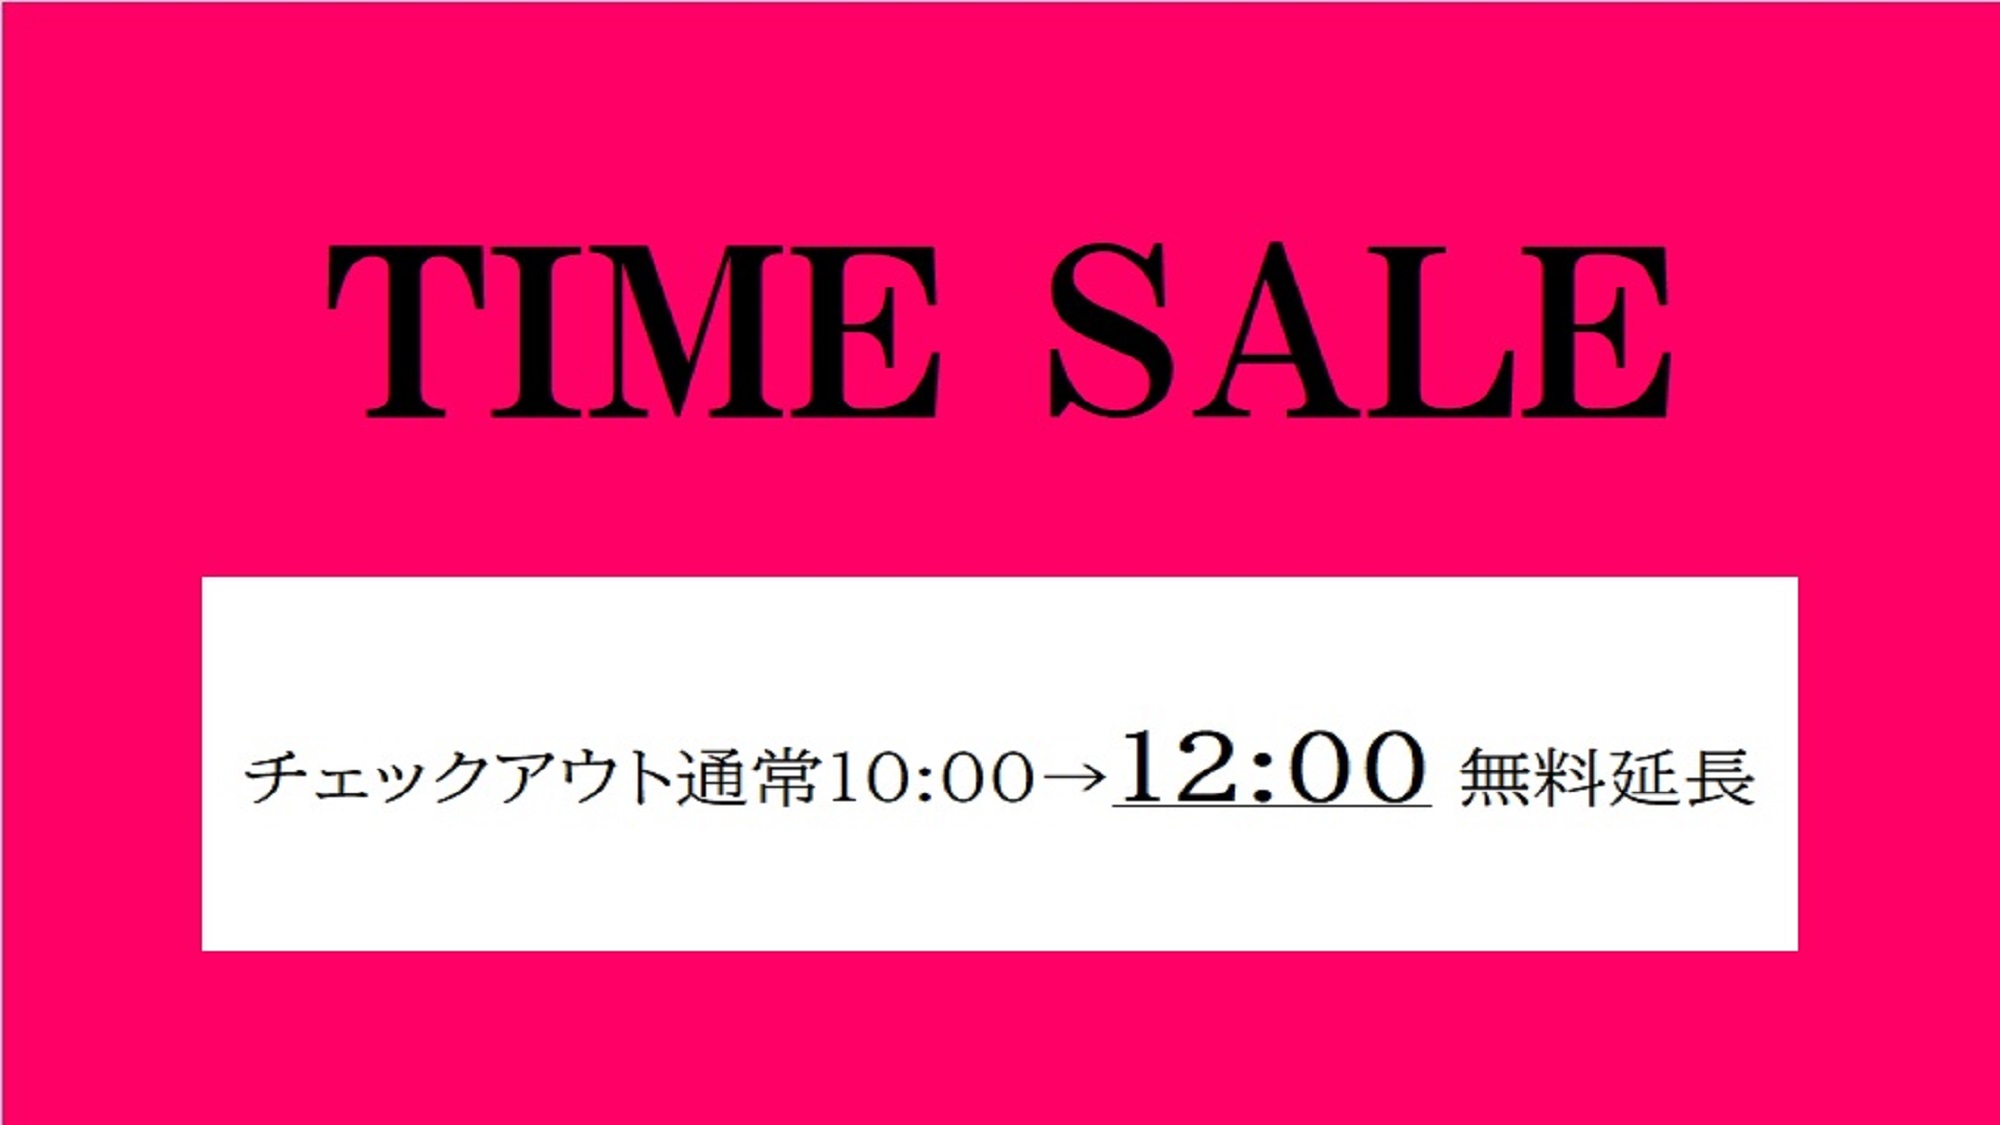 ■TIME　SALE 12:00OUT